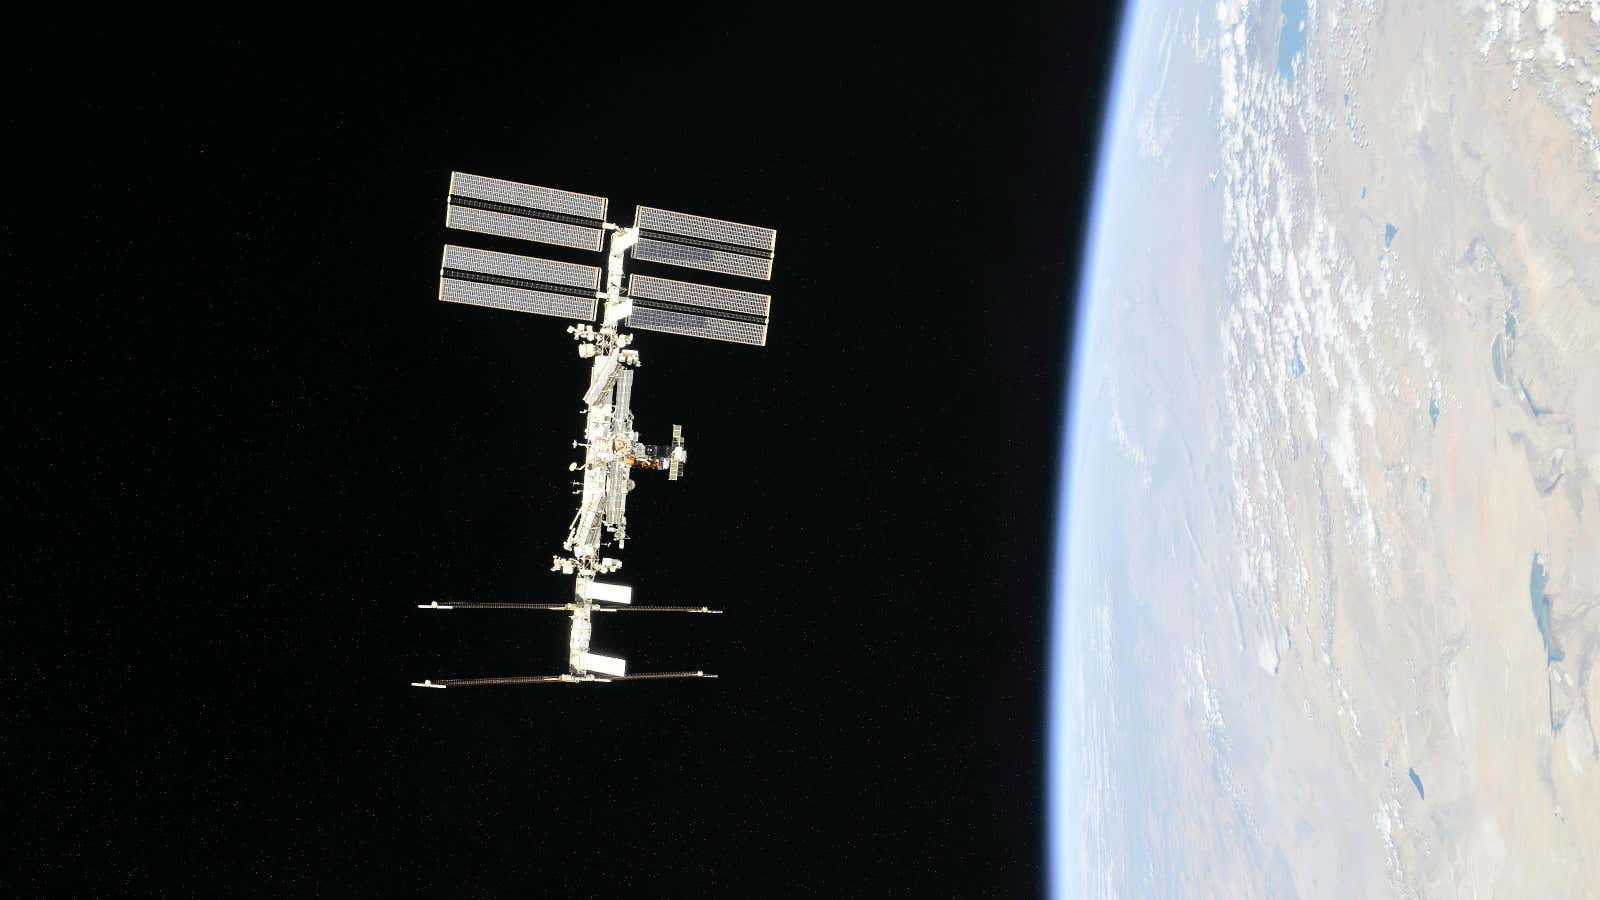 The International Space Station was the first big construction project in space.